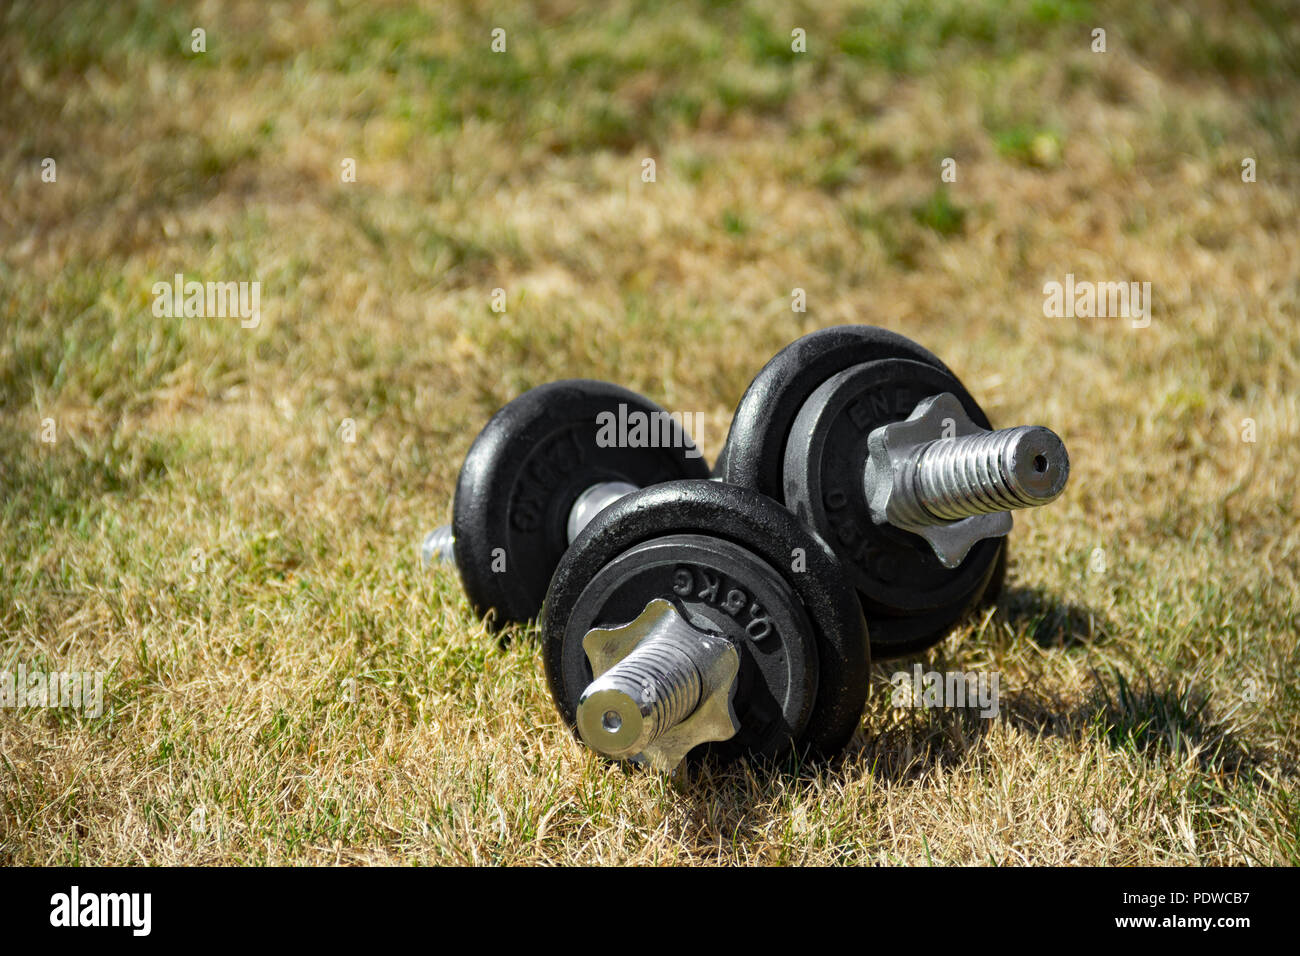 Dumbbells lay on the ground outdoors Stock Photo